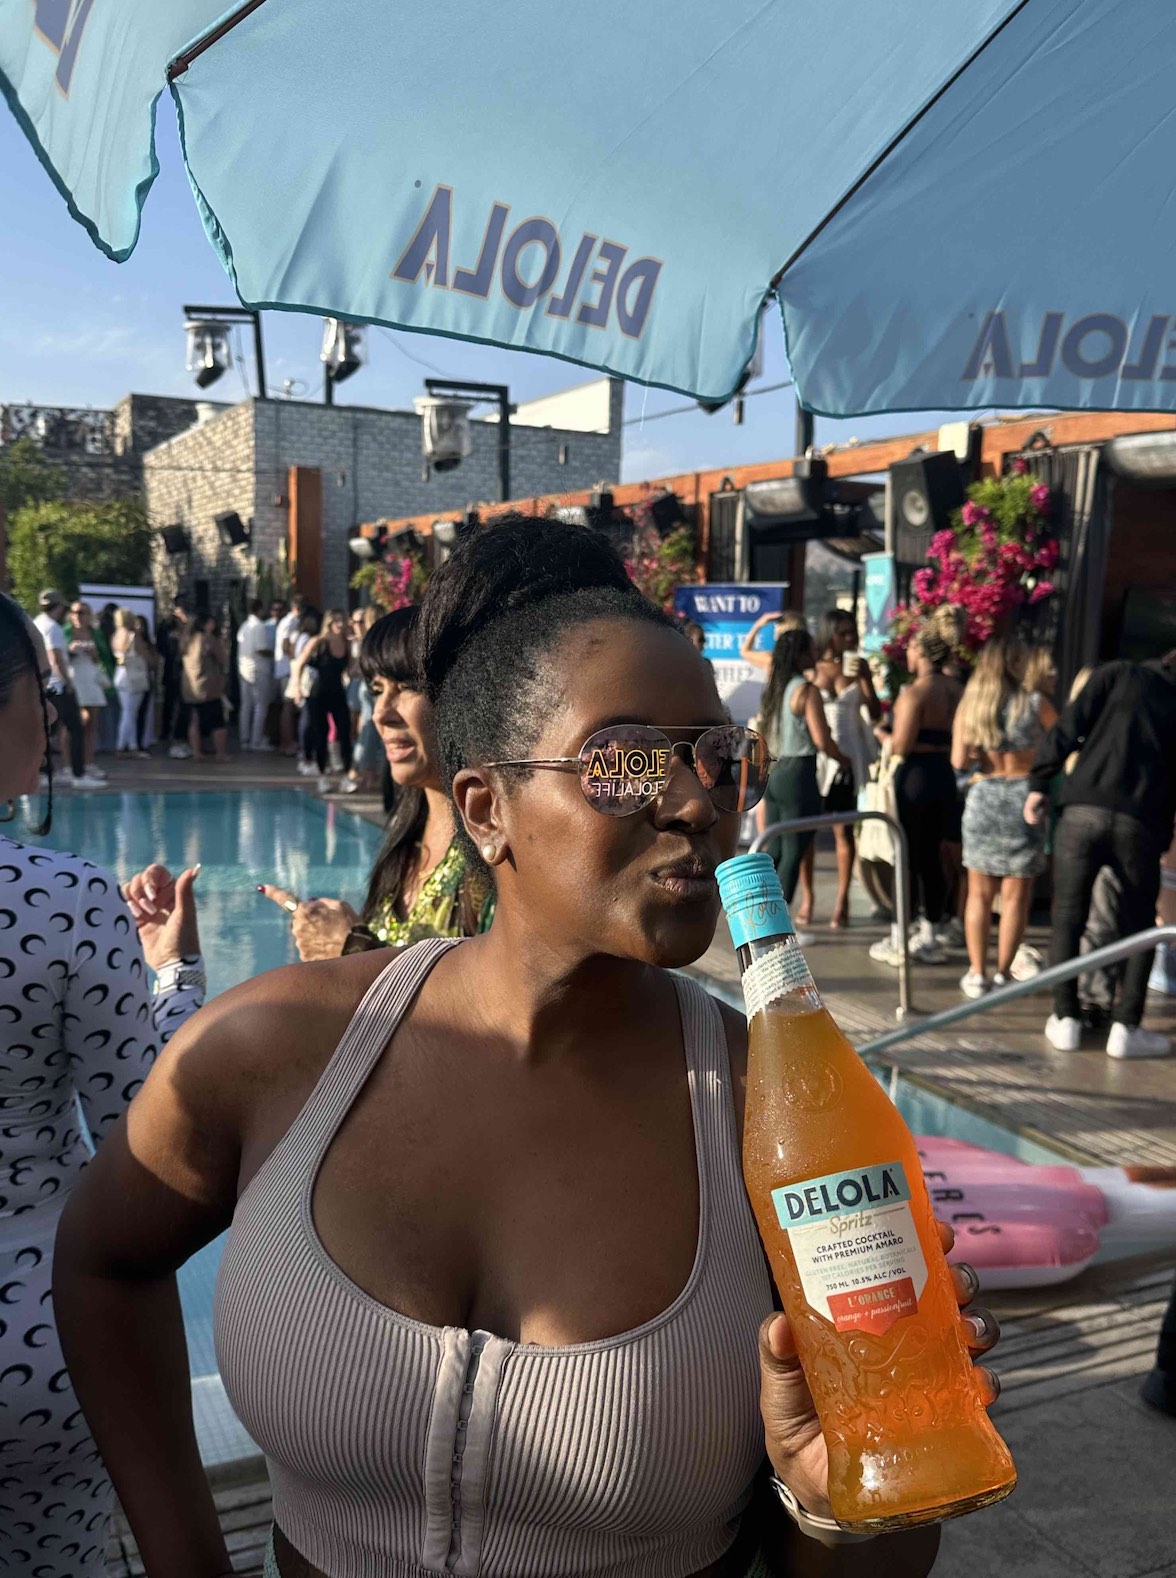 An image of lifestyle blogger Ariel holding a bottle of Delola.